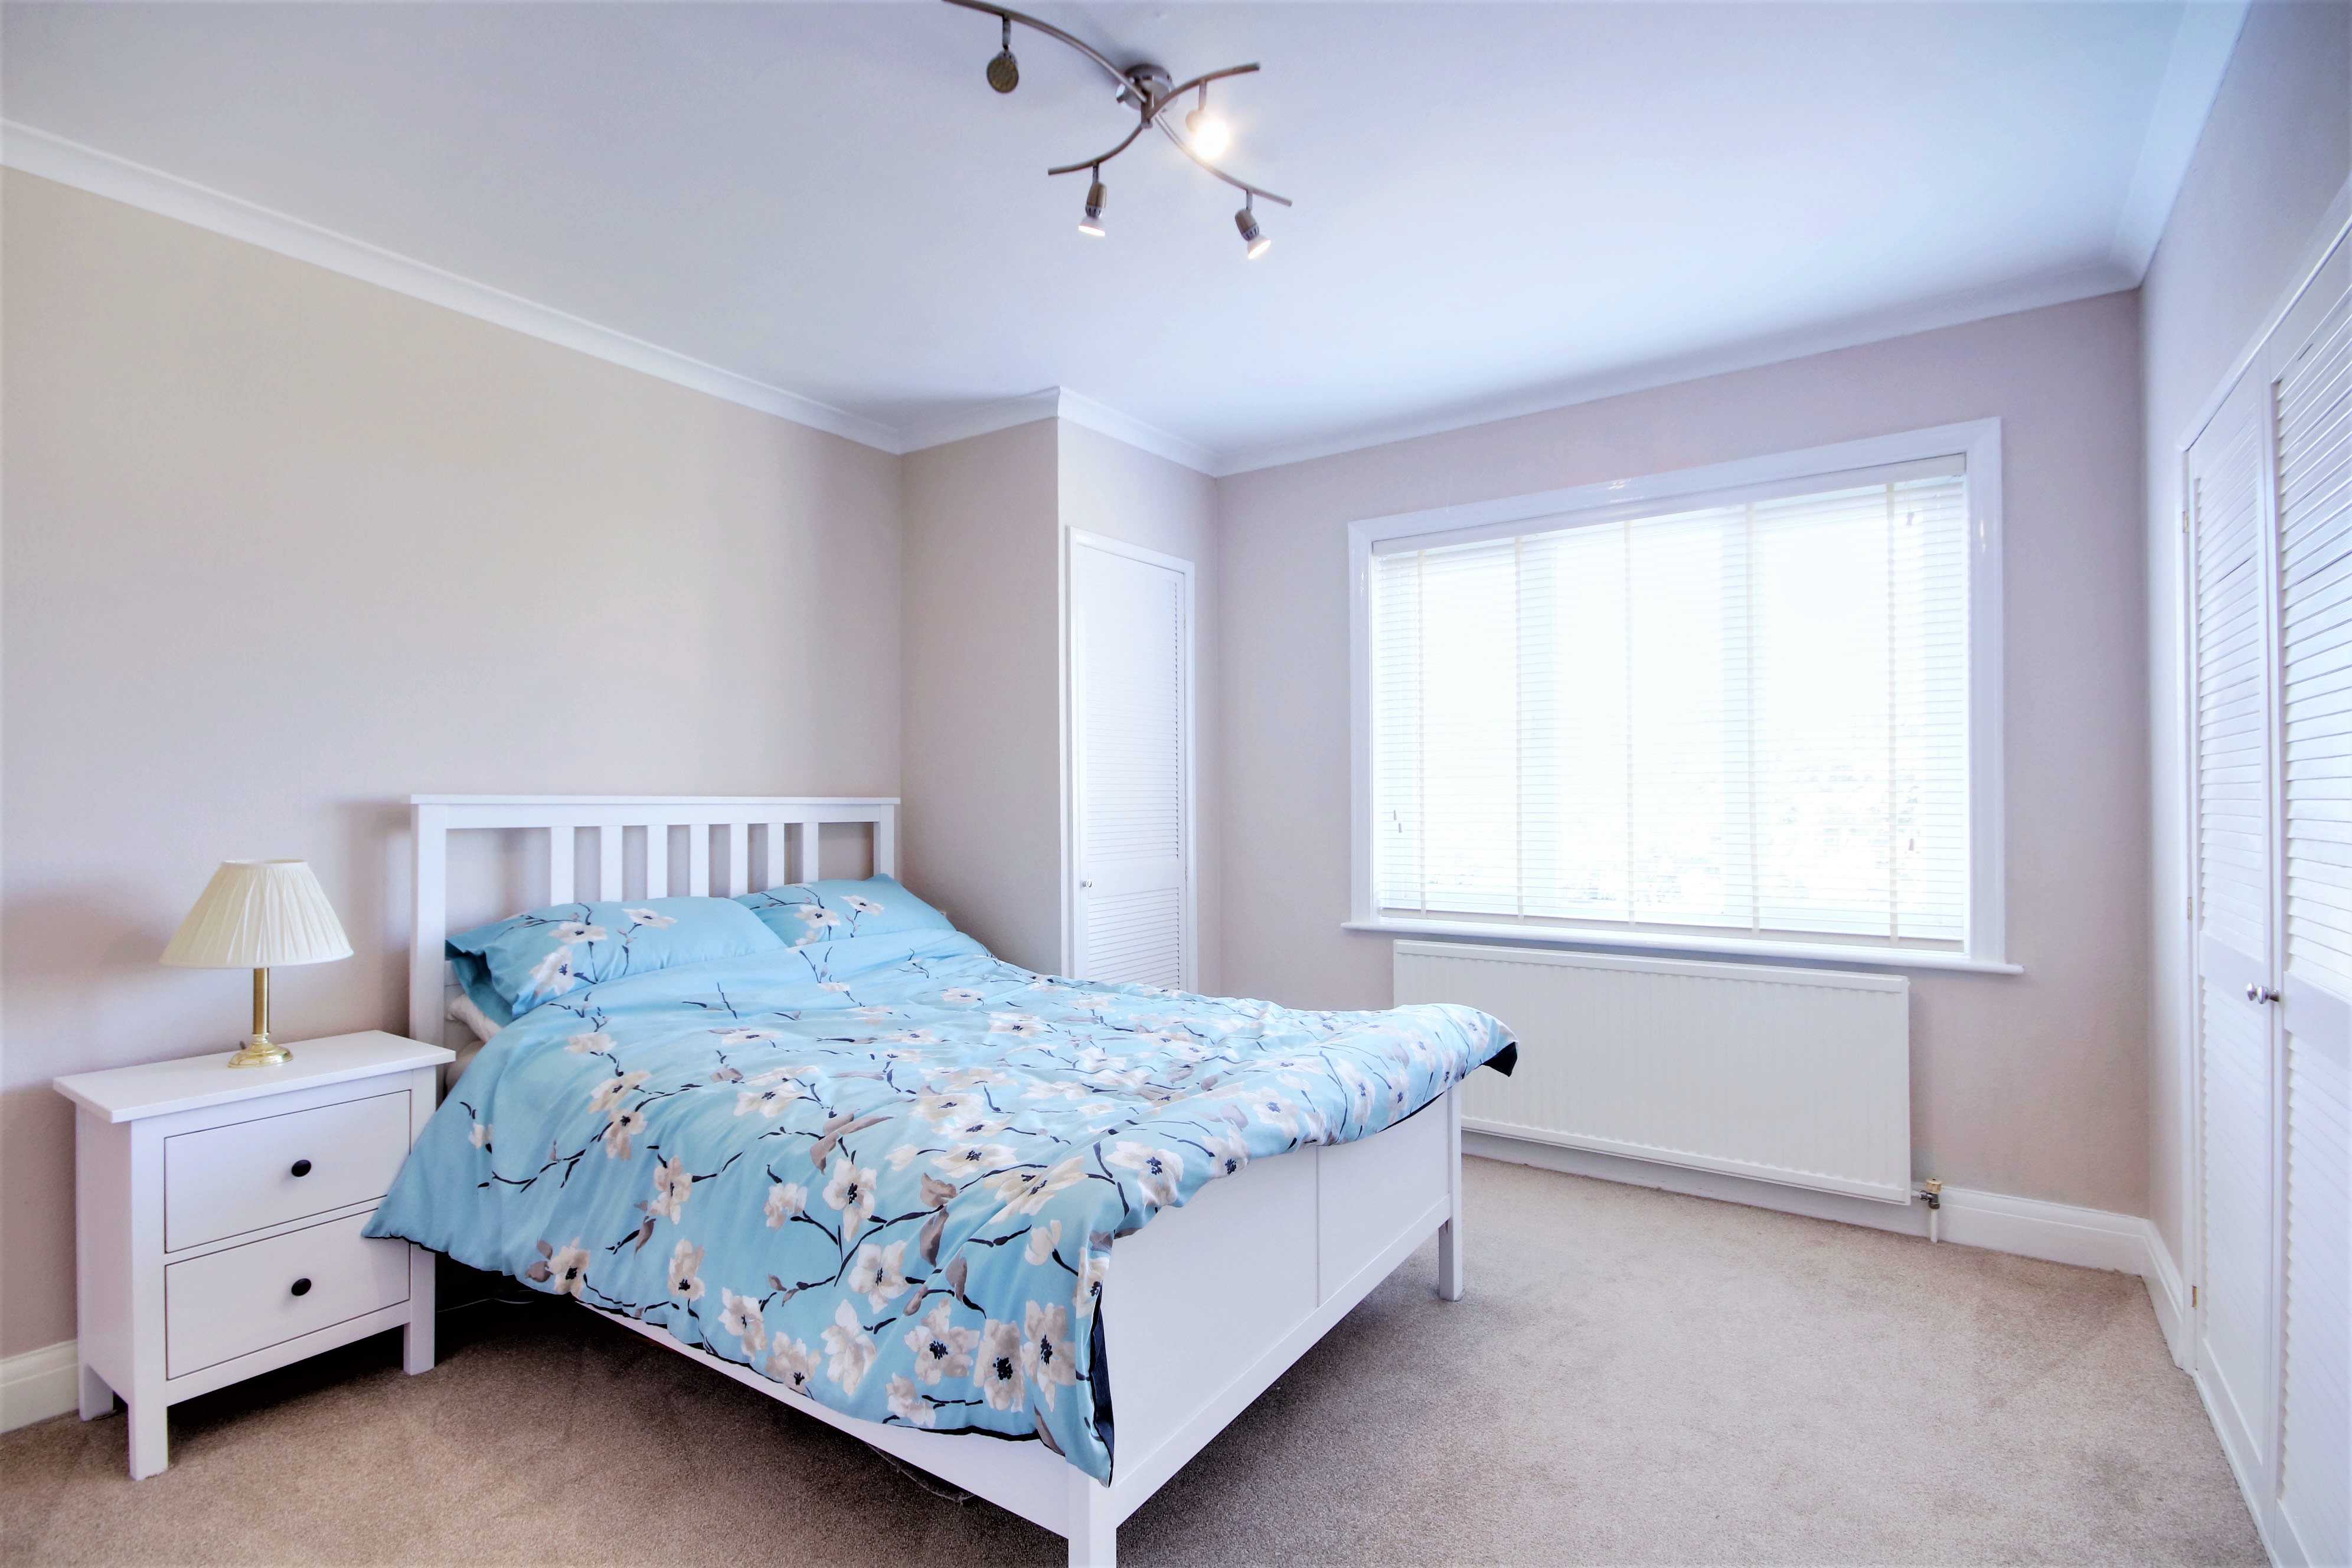 4 Bedrooms Semi-detached house for sale in Addlestone, Surrey KT15